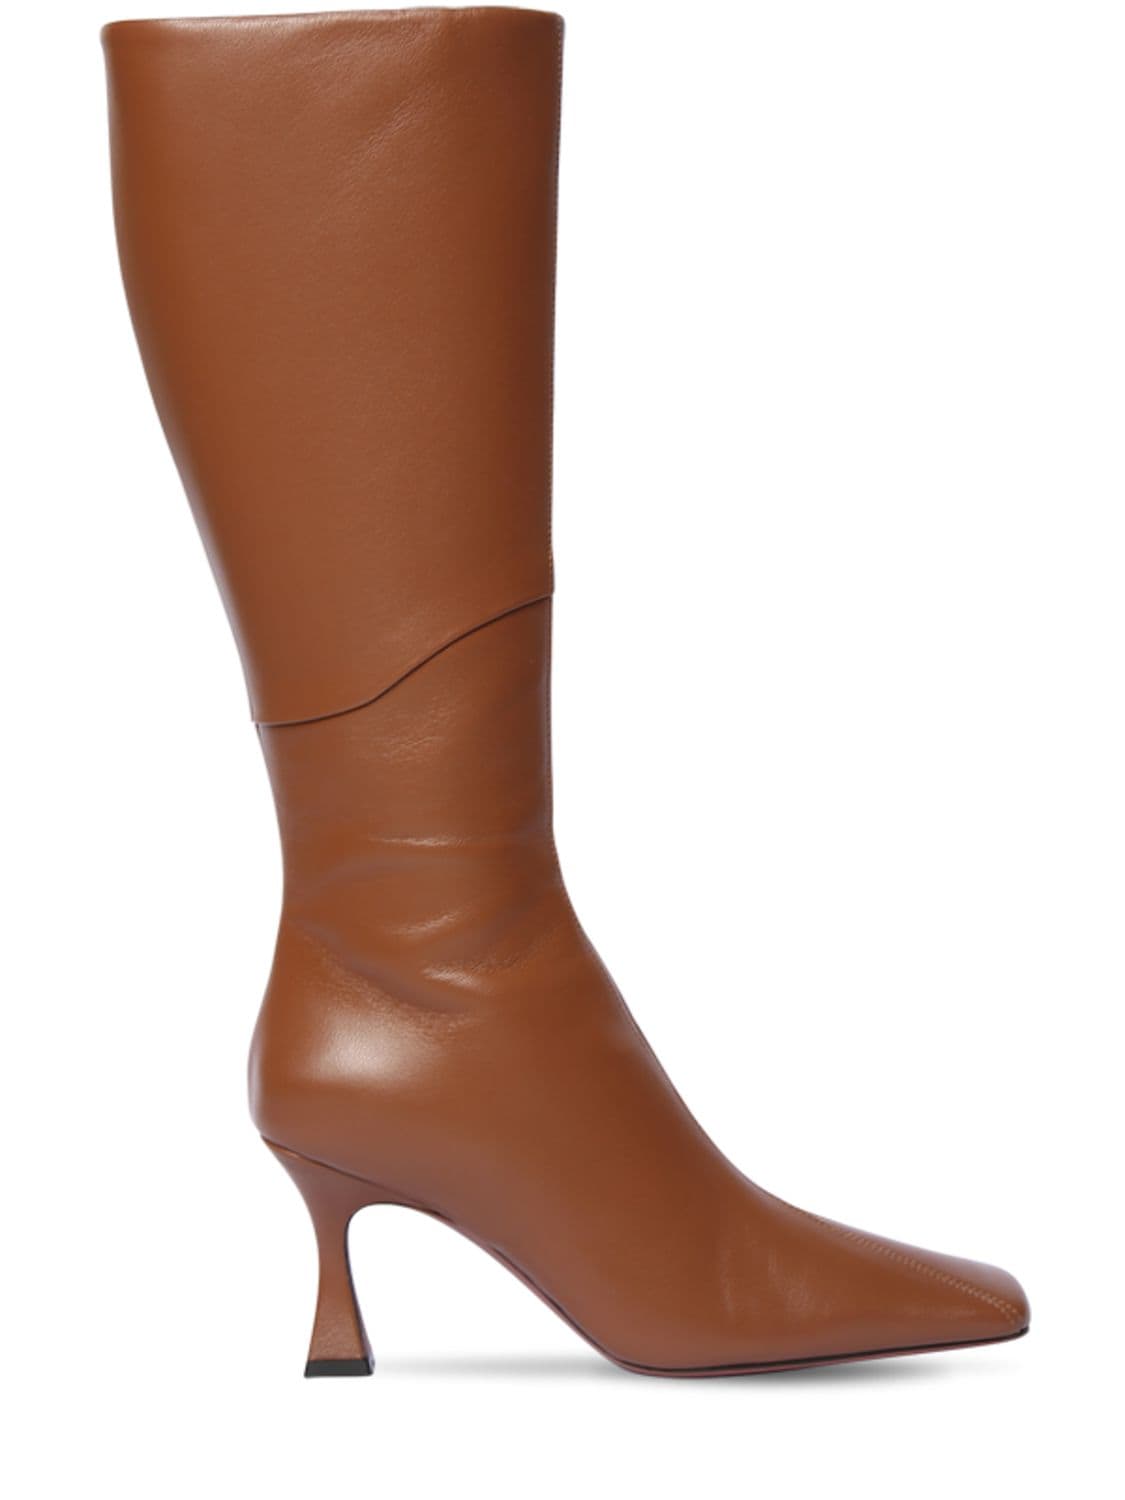 MANU ATELIER 80mm Xx Duck Leather Tall Boots